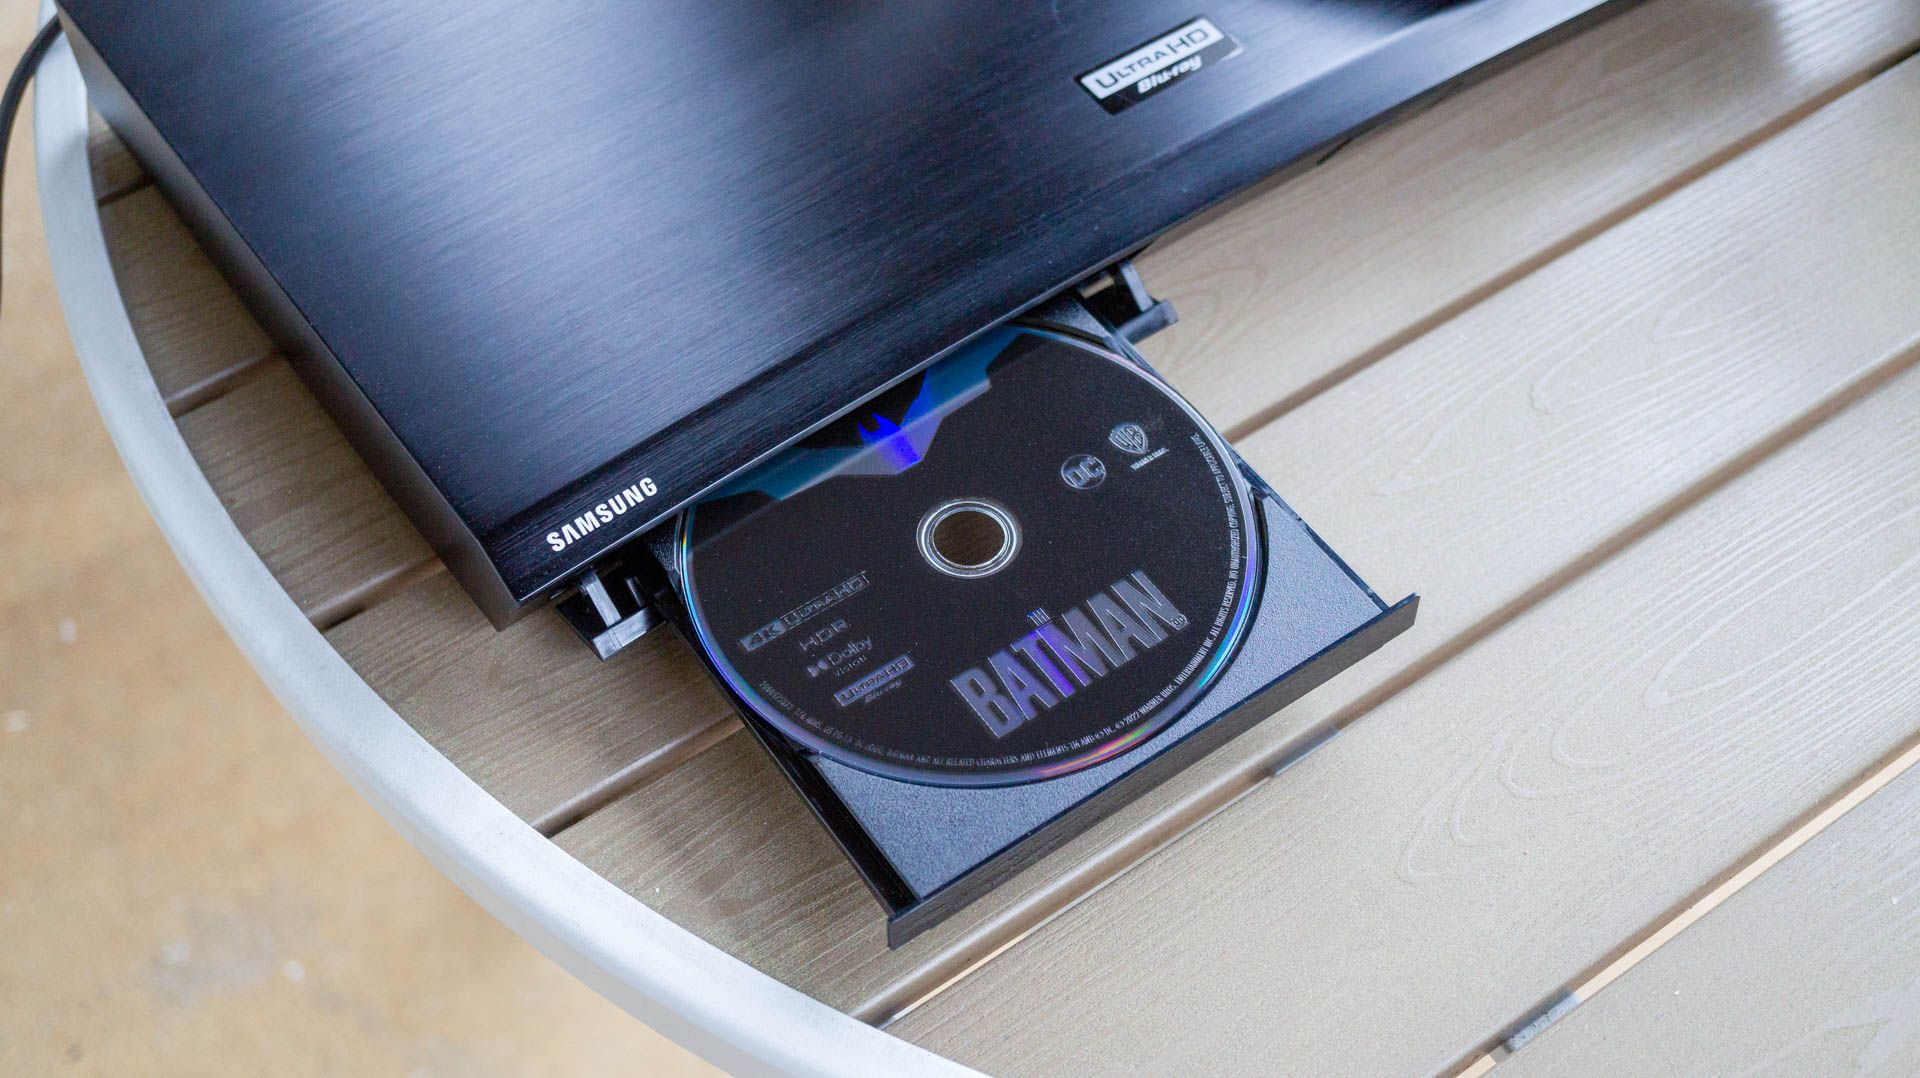 Movie in Blu-ray player